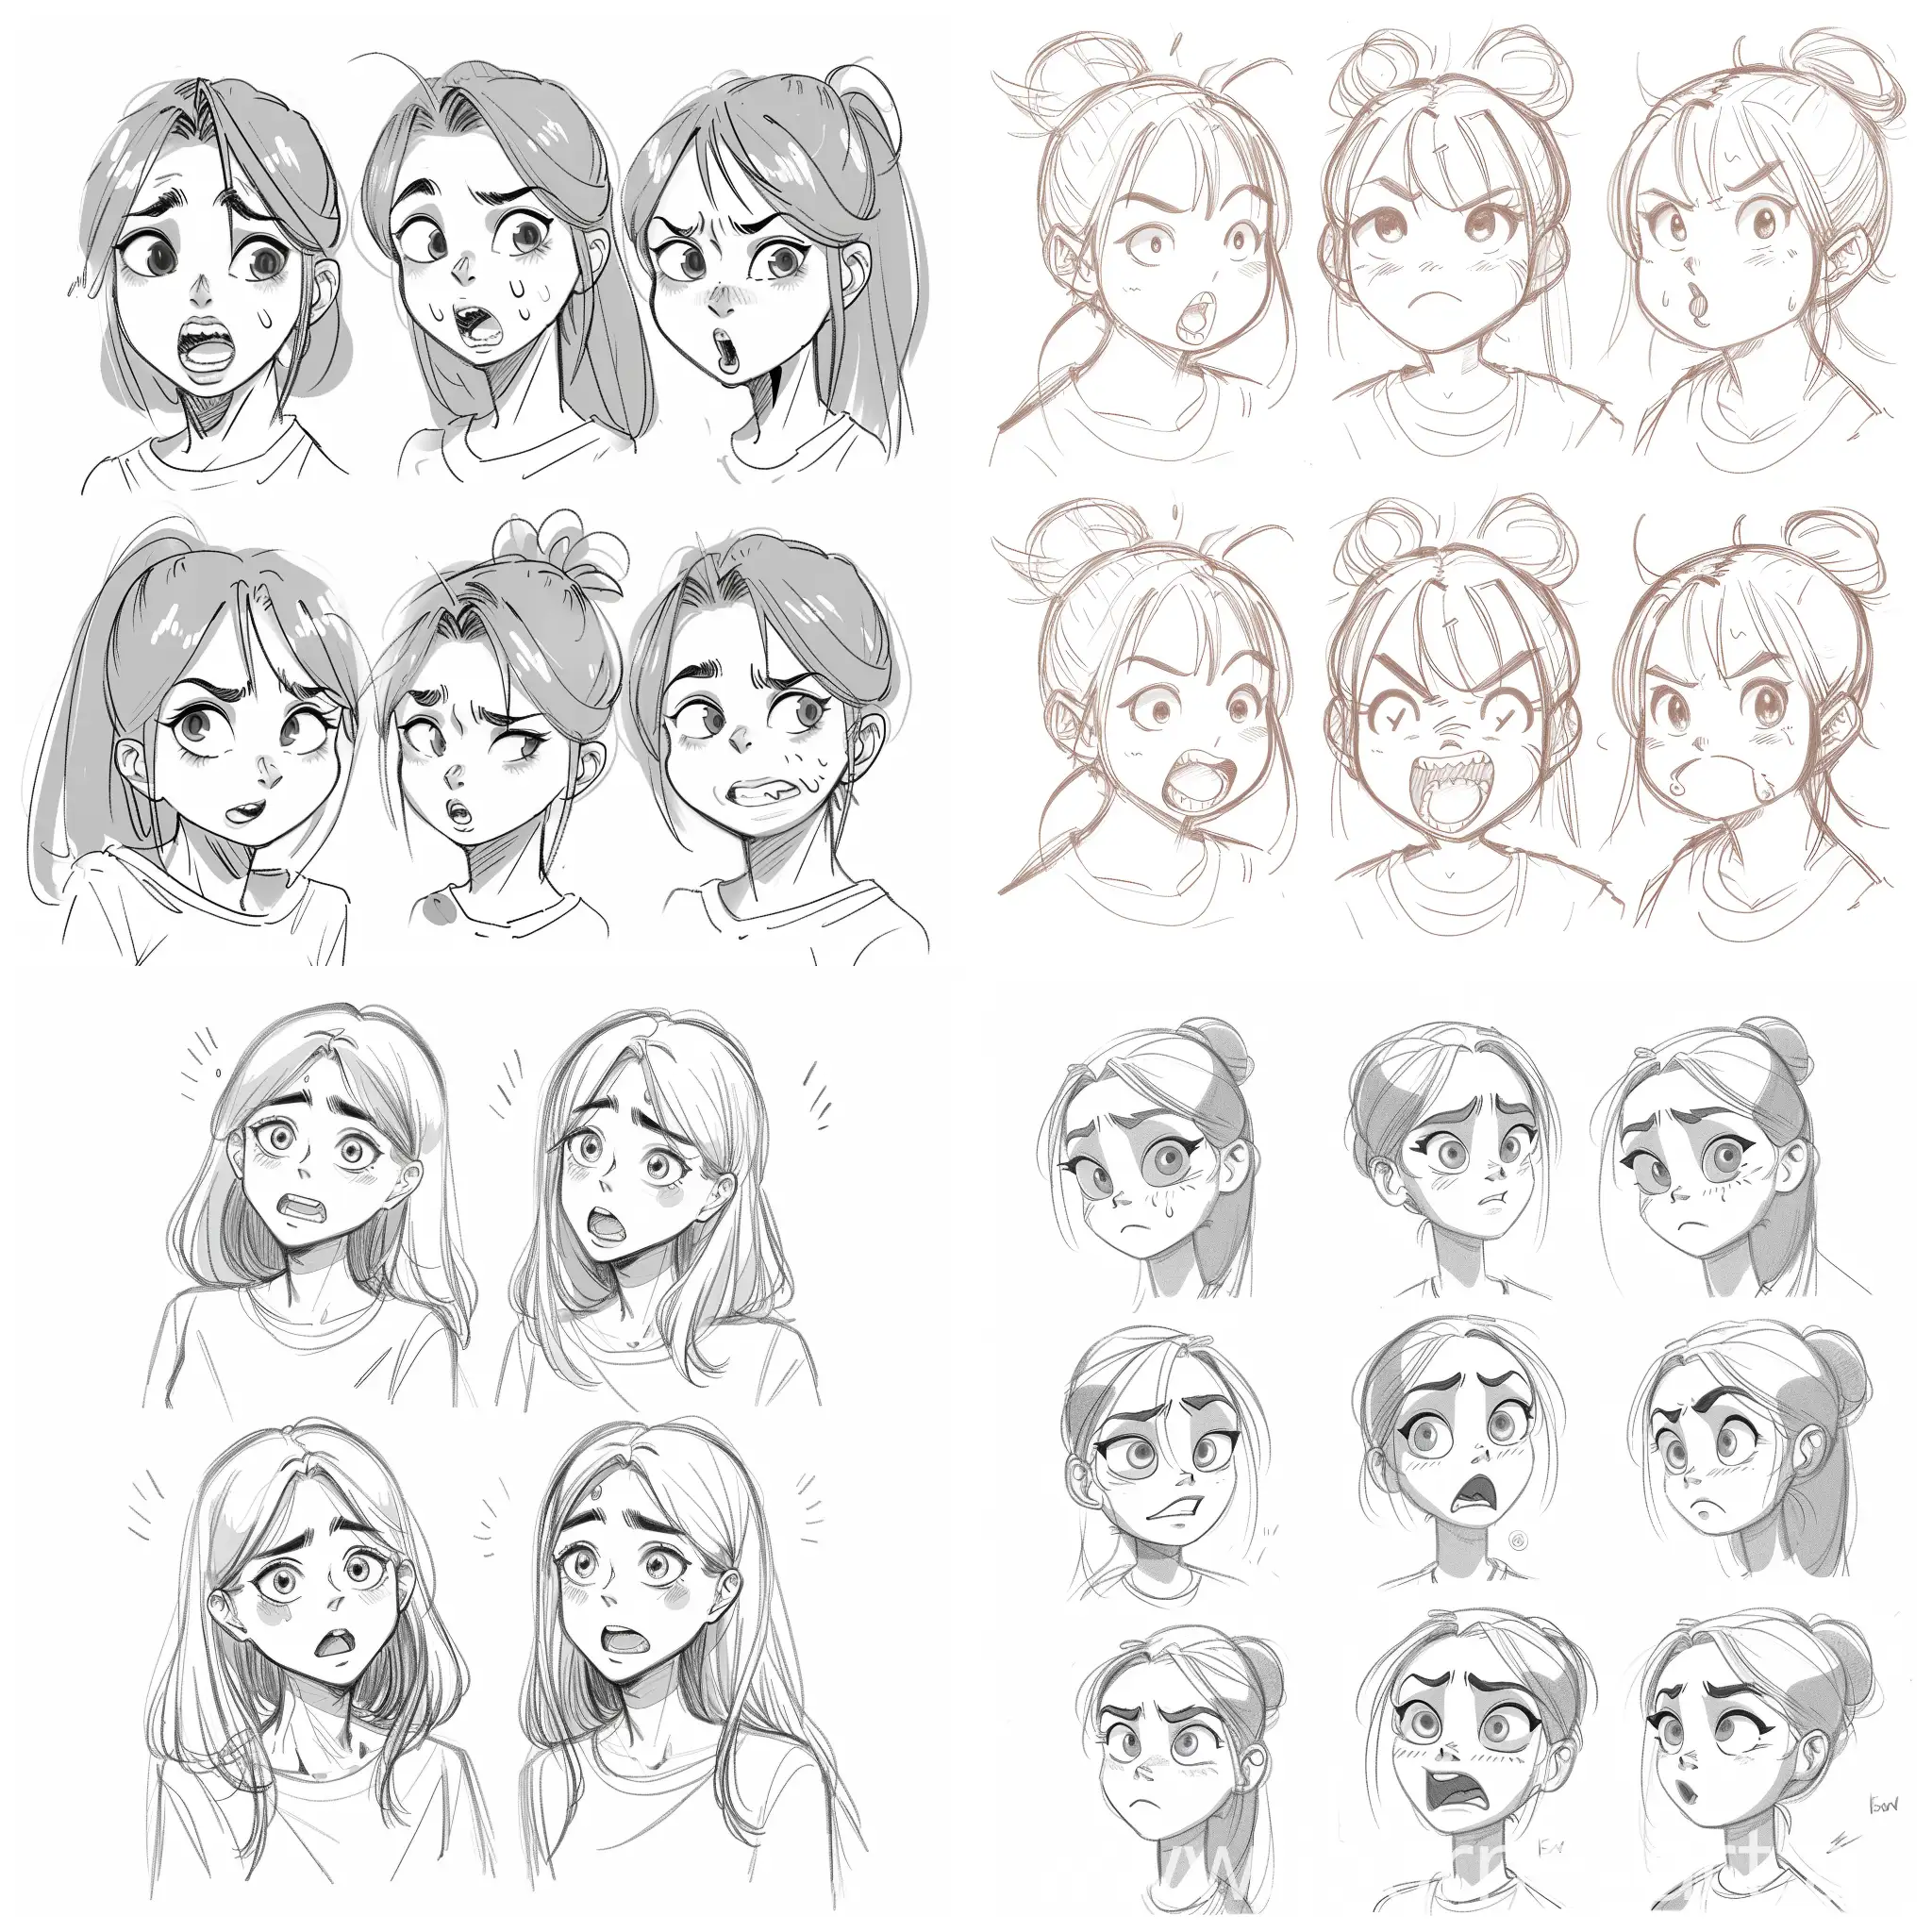 Anime-Female-Character-Expressions-Sketch-Cute-Anime-Girl-with-Varied-Facial-Expressions